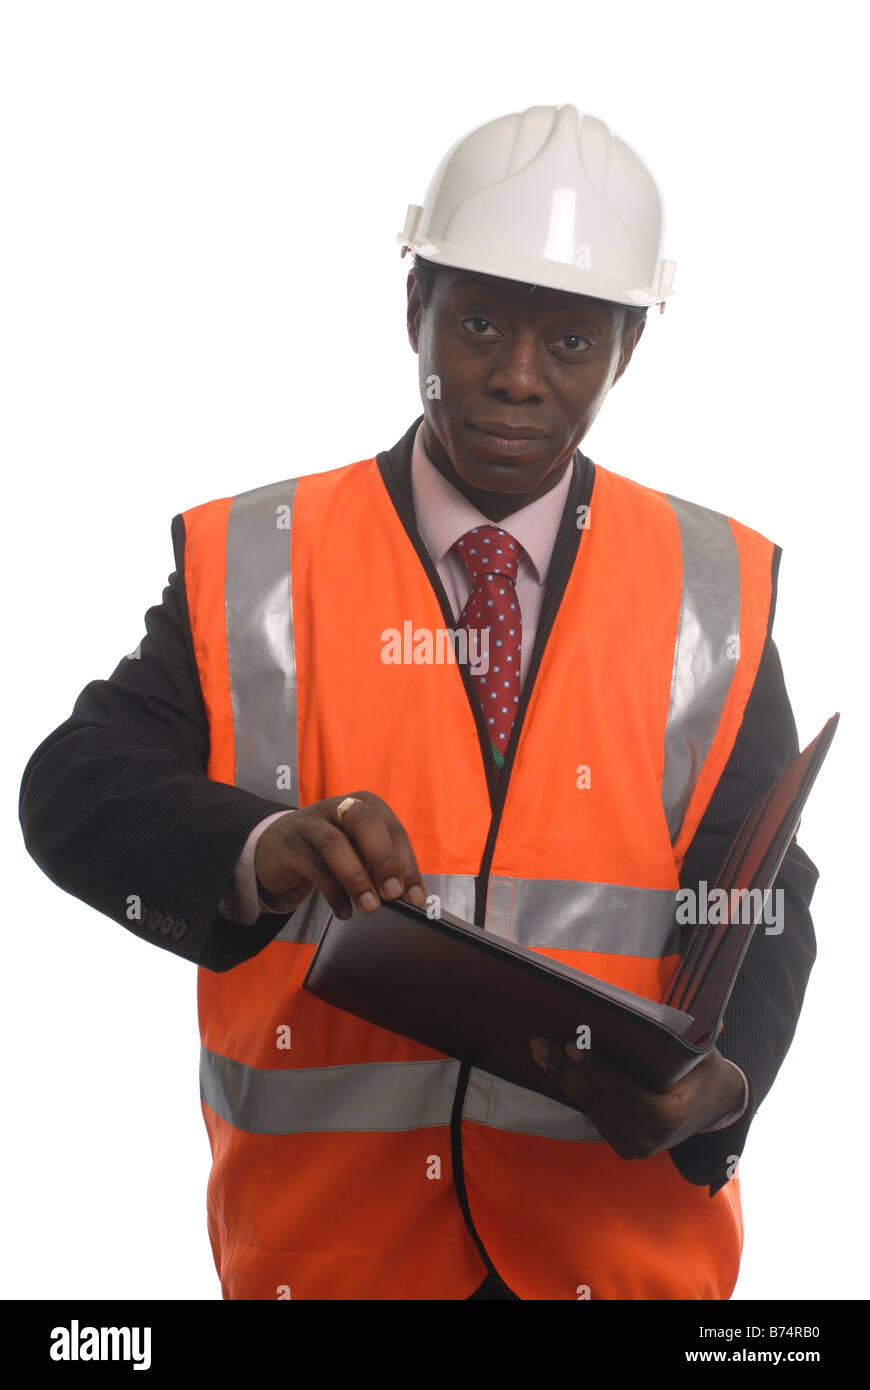 Cut out of a man overseeing building work in a hard hat and hi-viz vest Stock Photo